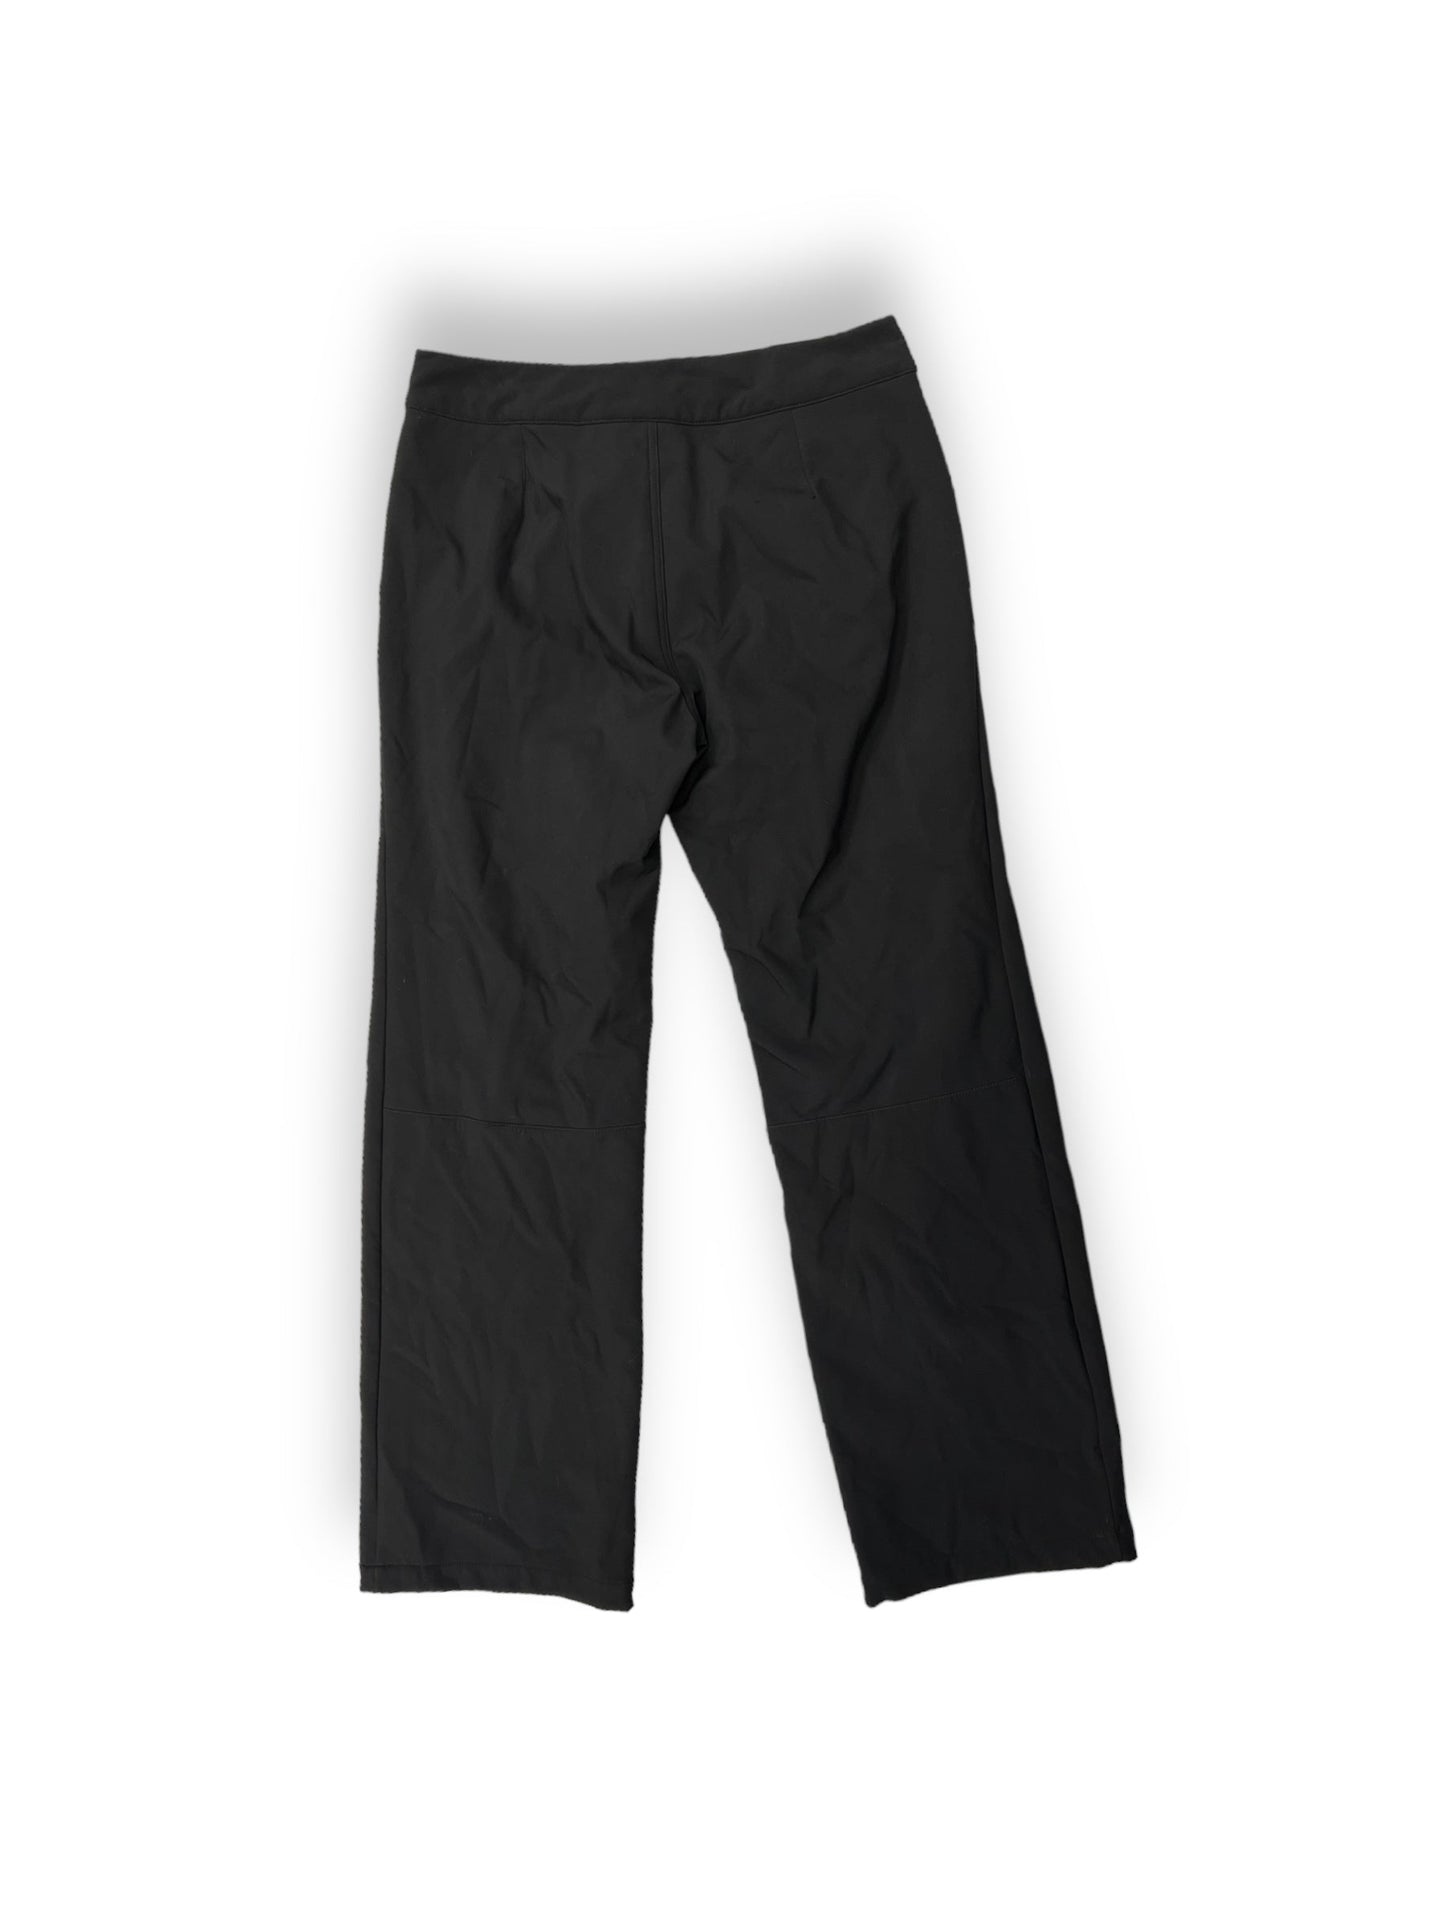 Athletic Pants By WHITE SIERRA  Size: L